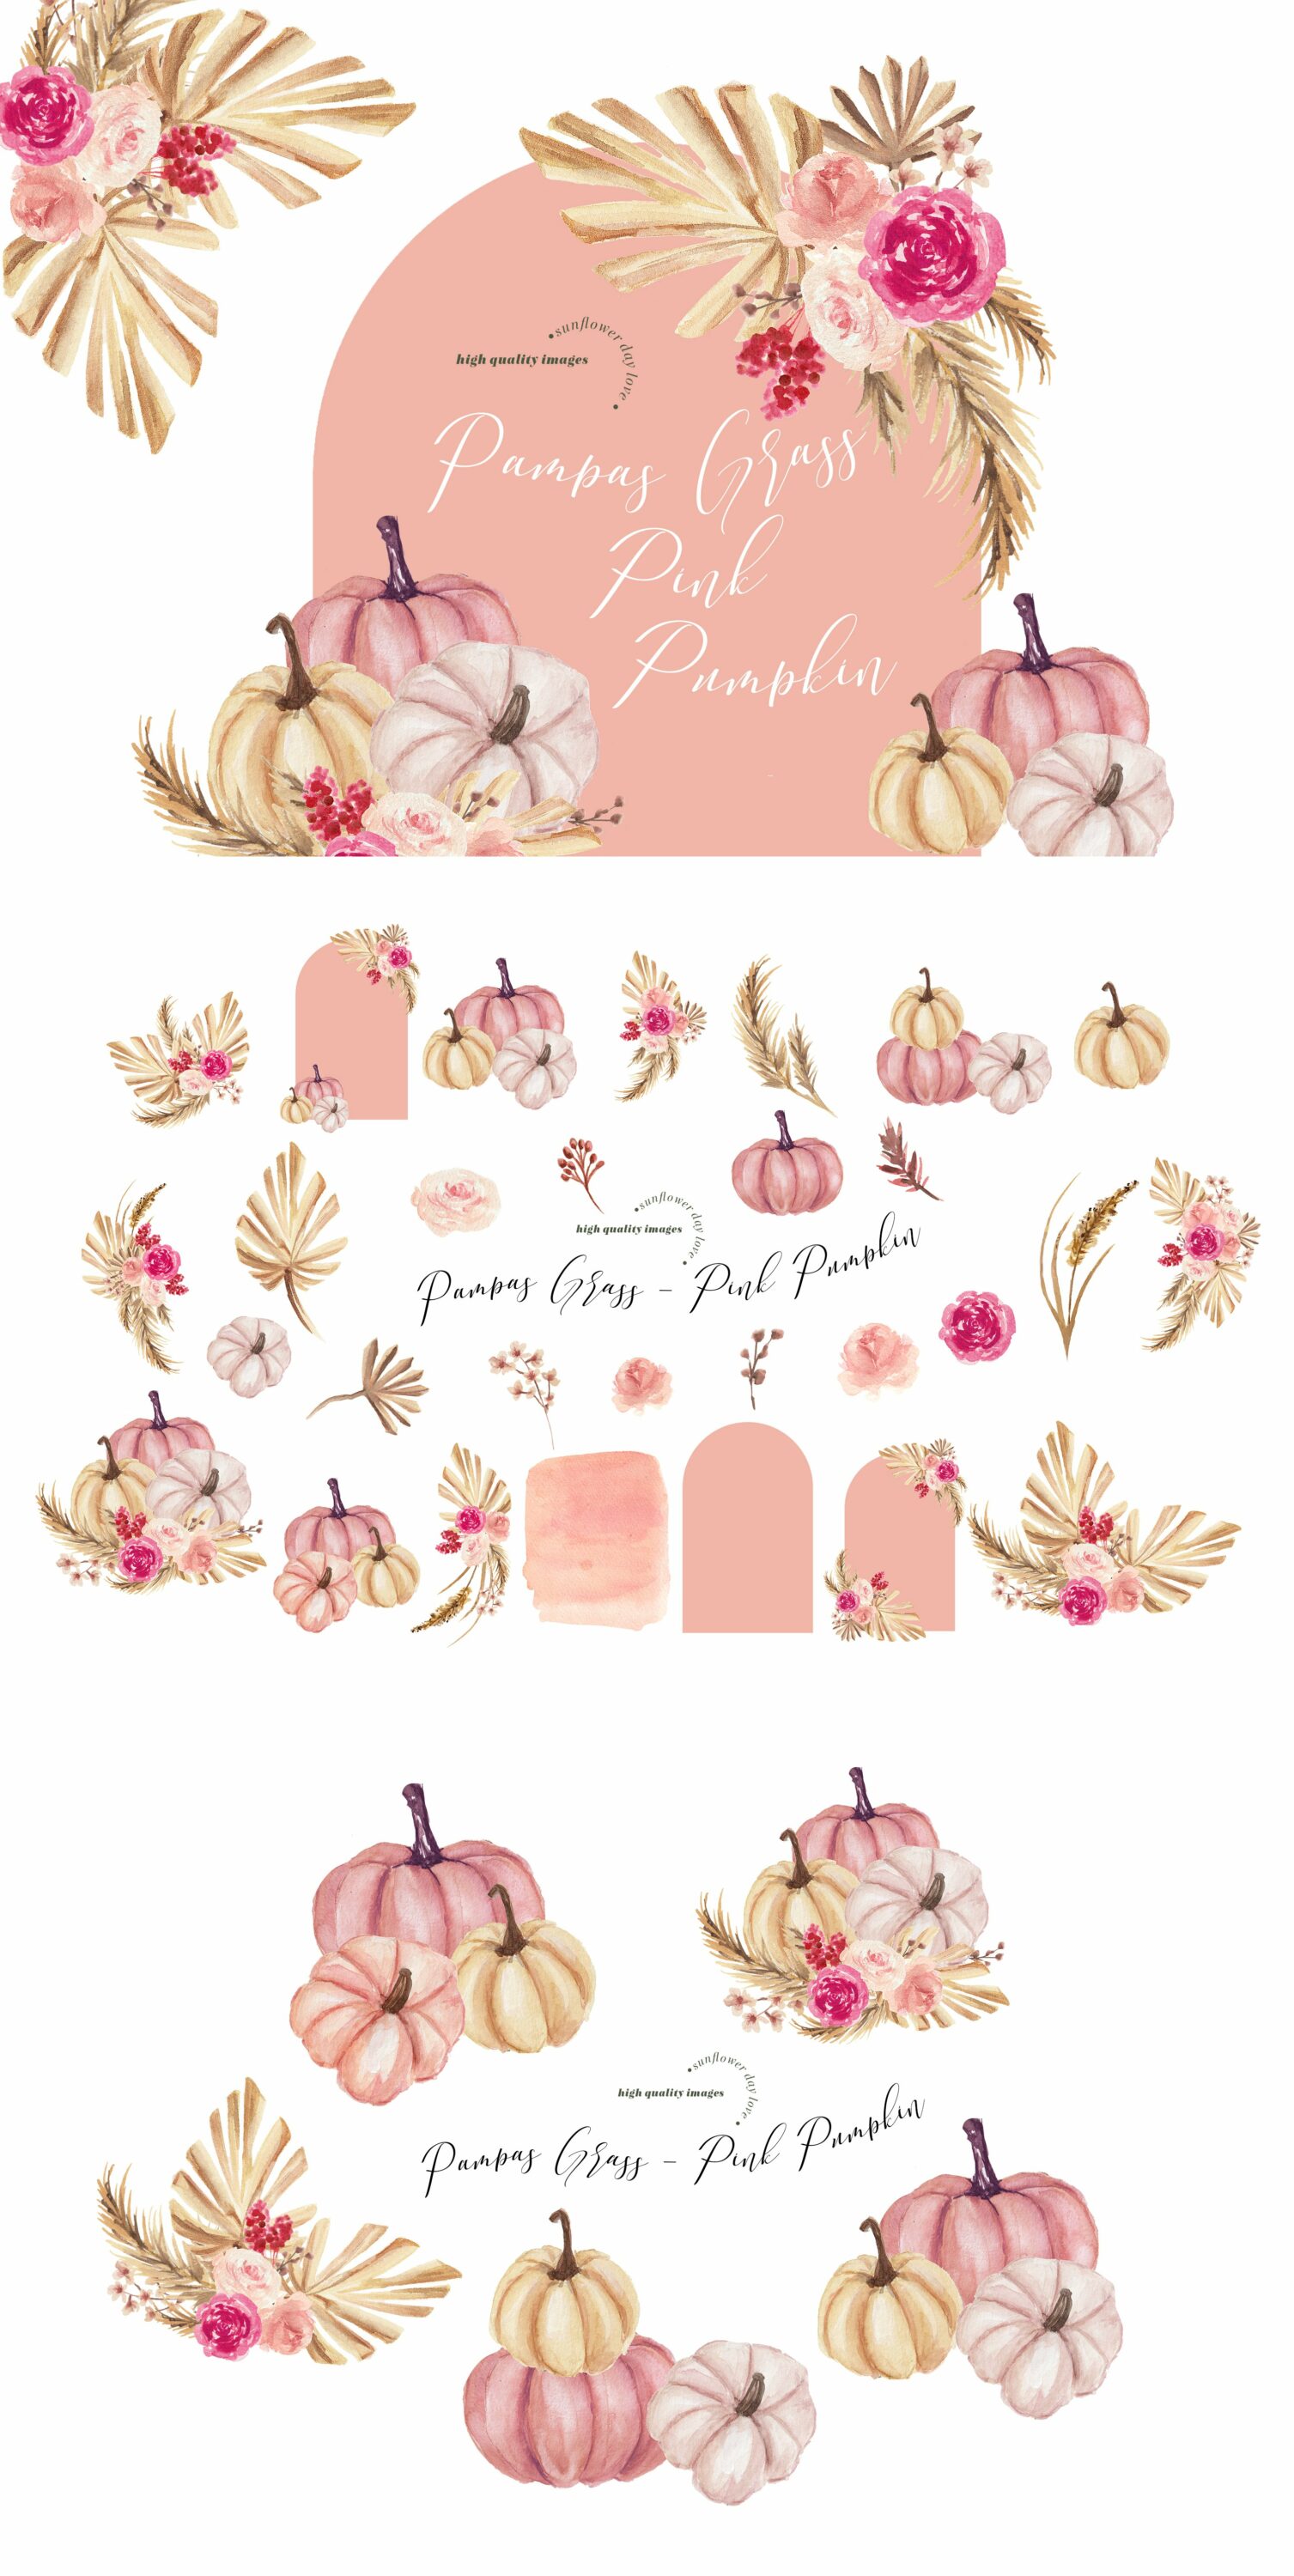 Use this delicate pumpkins for nice illustrations.